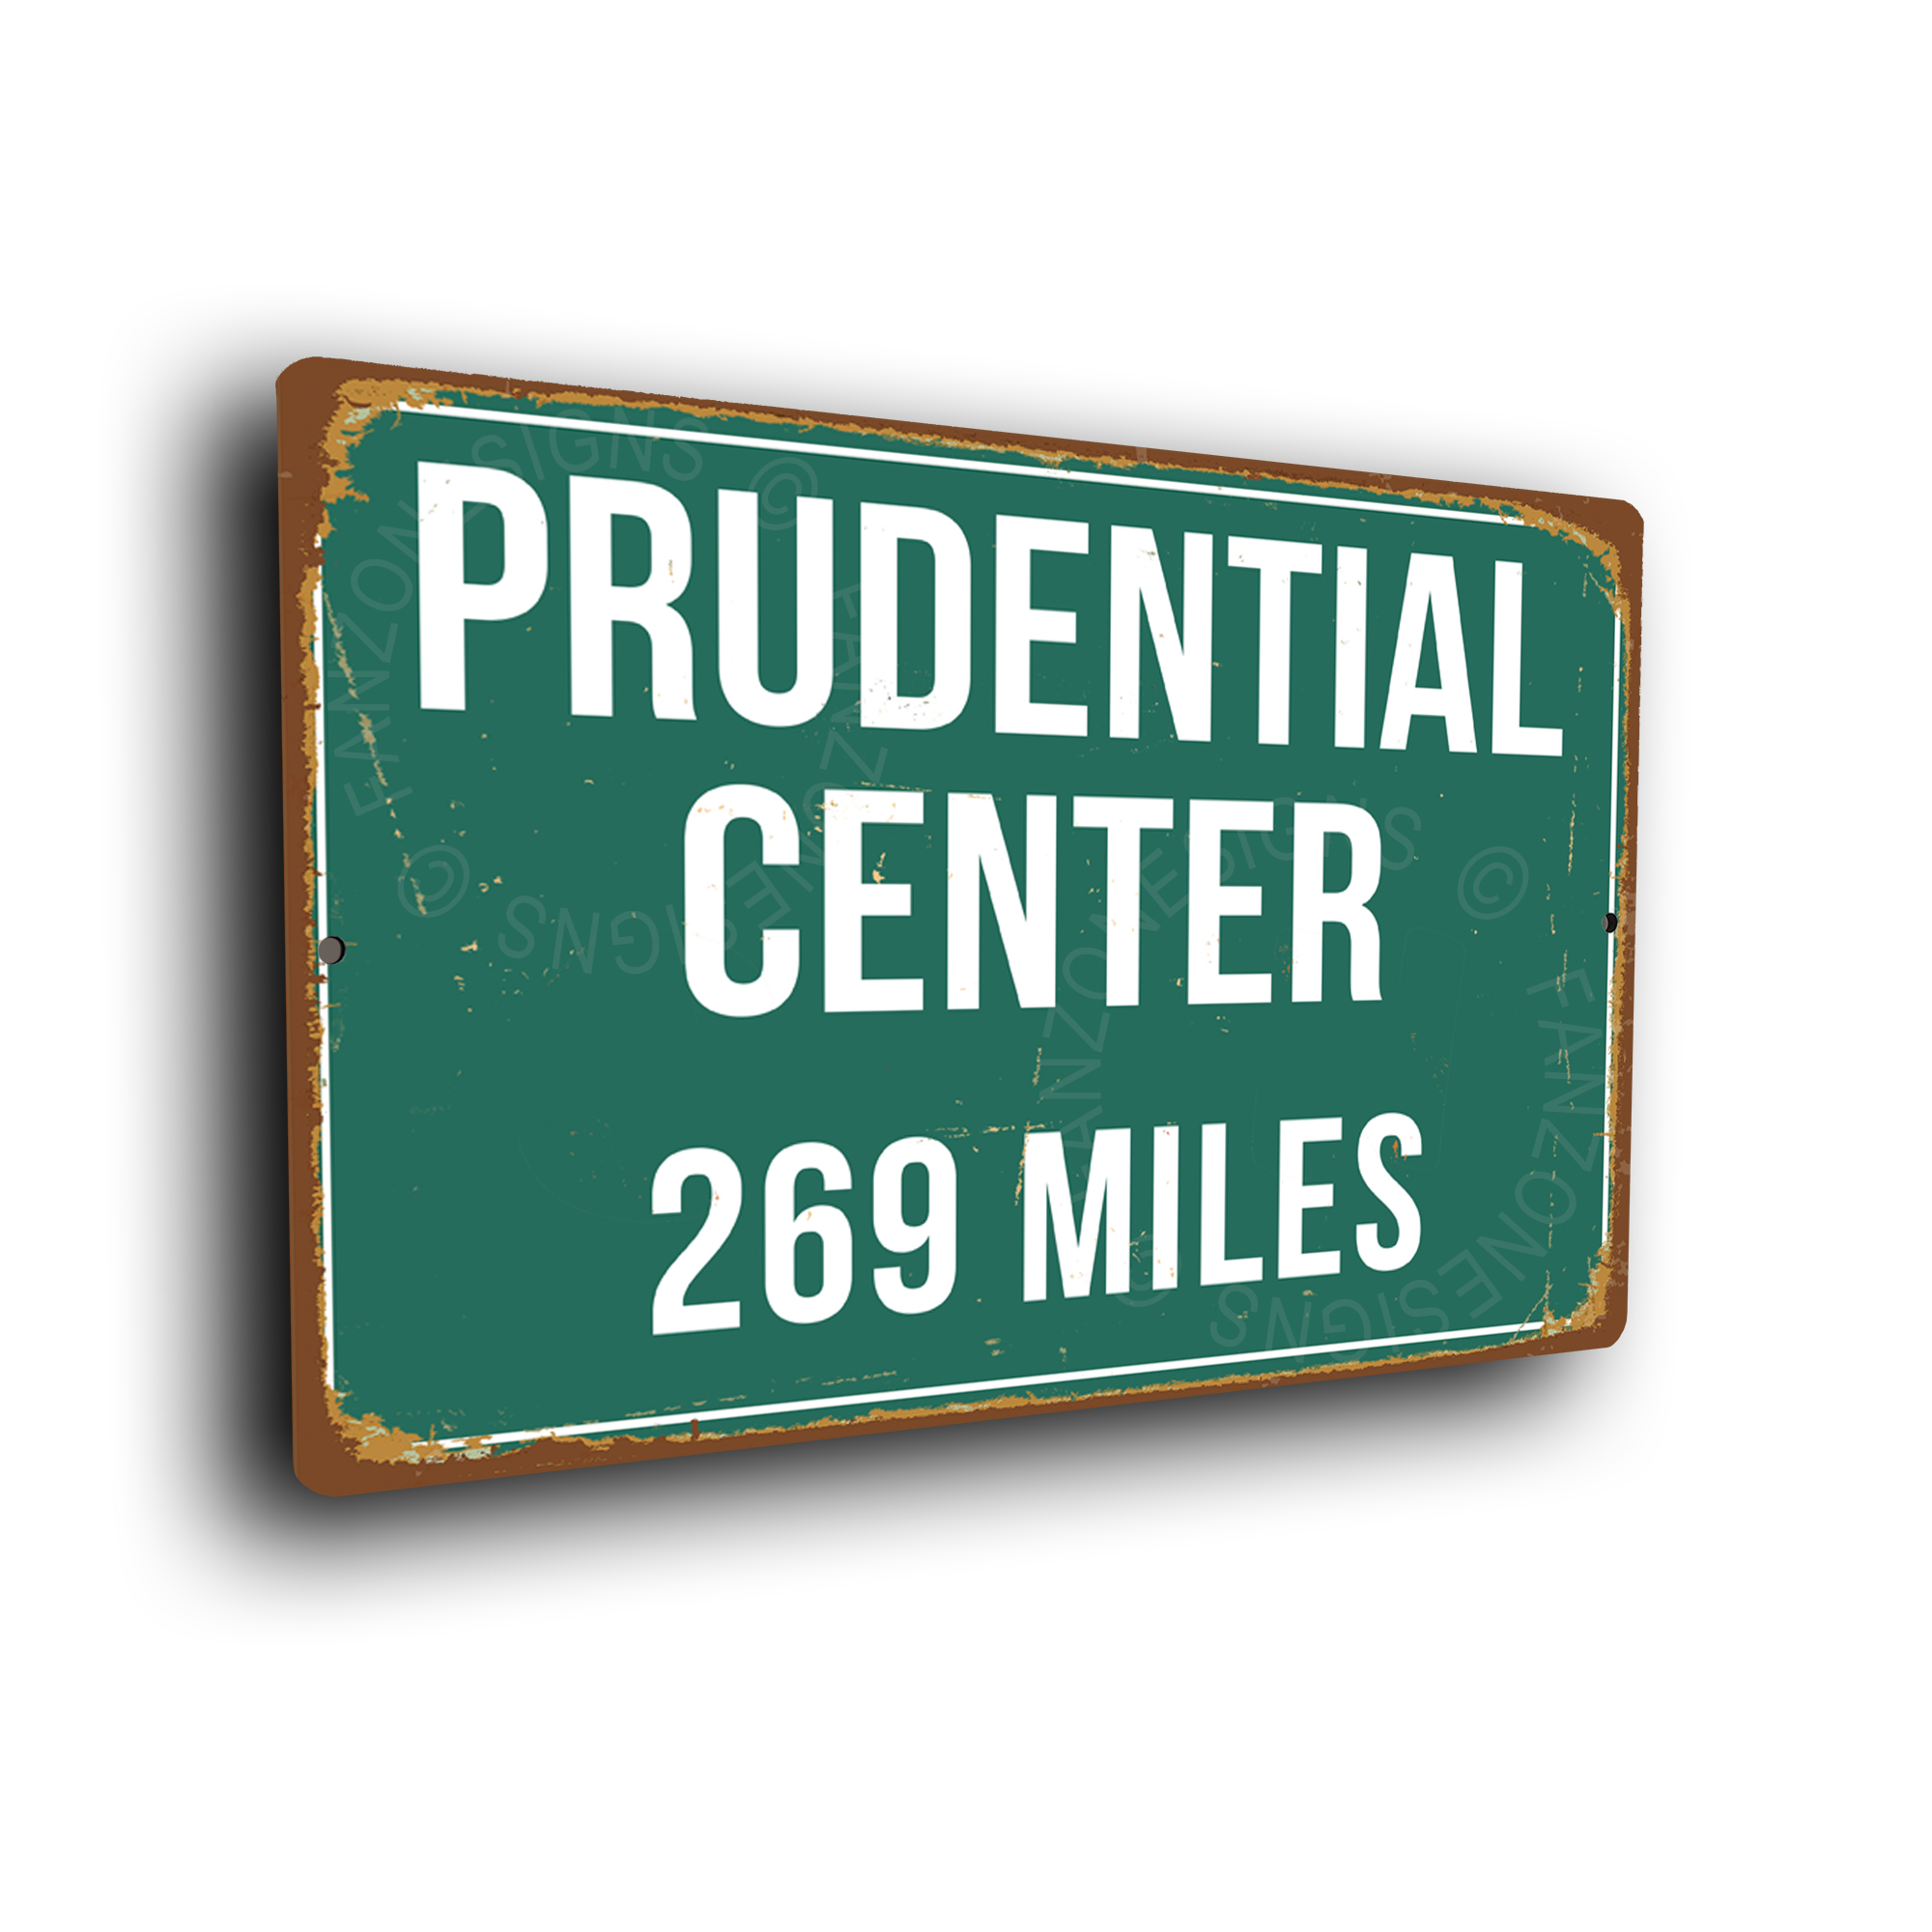 Personalized Highway Distance Sign To: PPG Paints Arena Home 